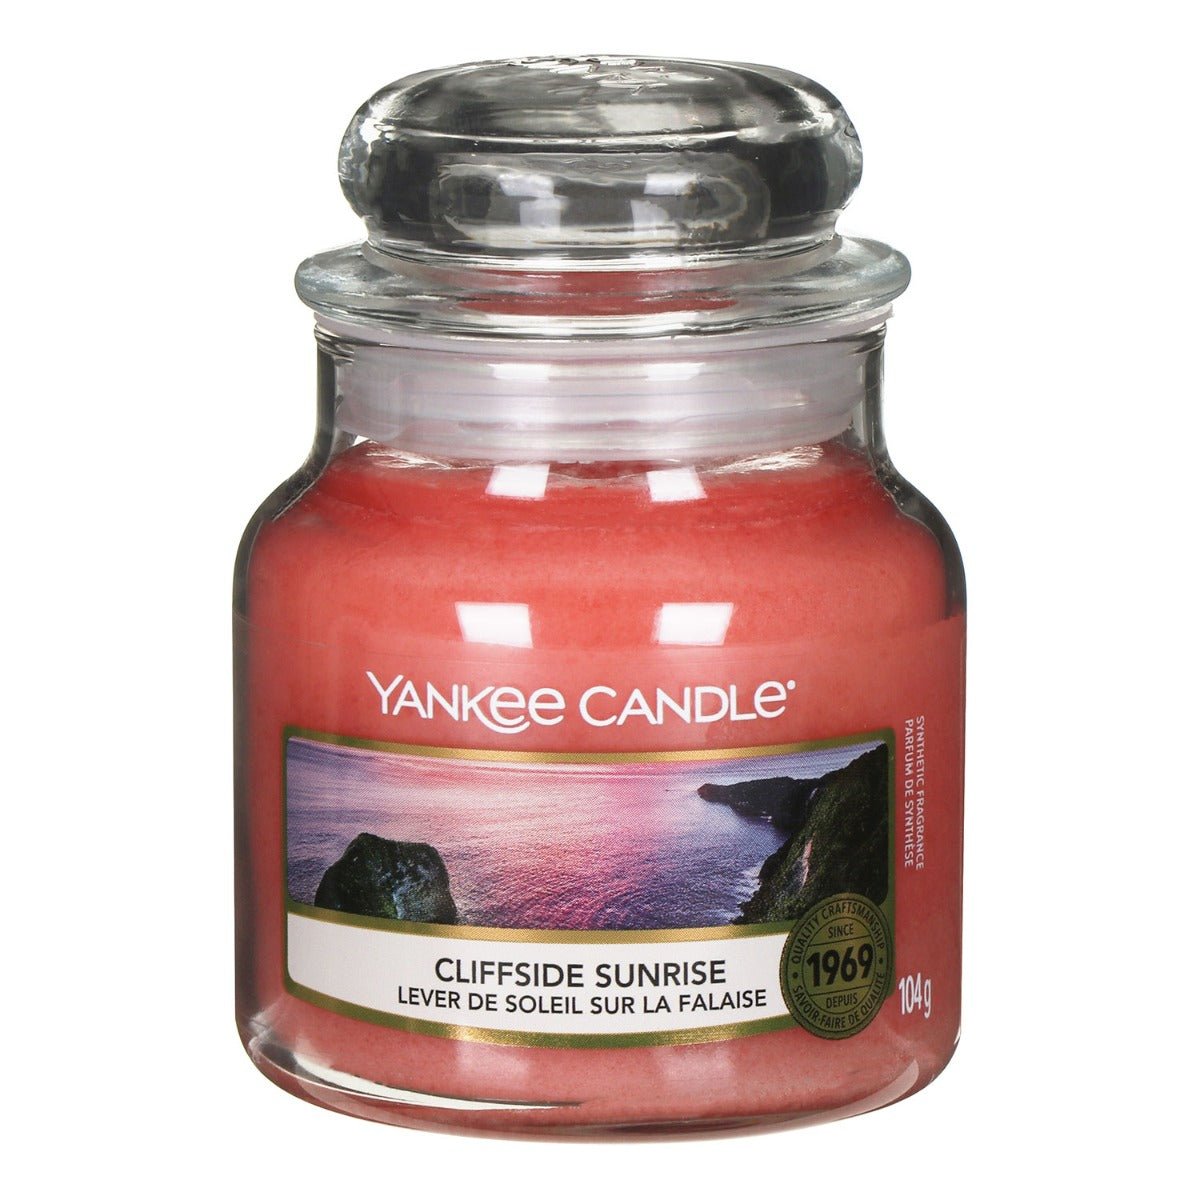 Yankee Candle Classic Small Jar Cliffside Sunrise 104G - AllurebeautypkYankee Candle Classic Small Jar Cliffside Sunrise 104G